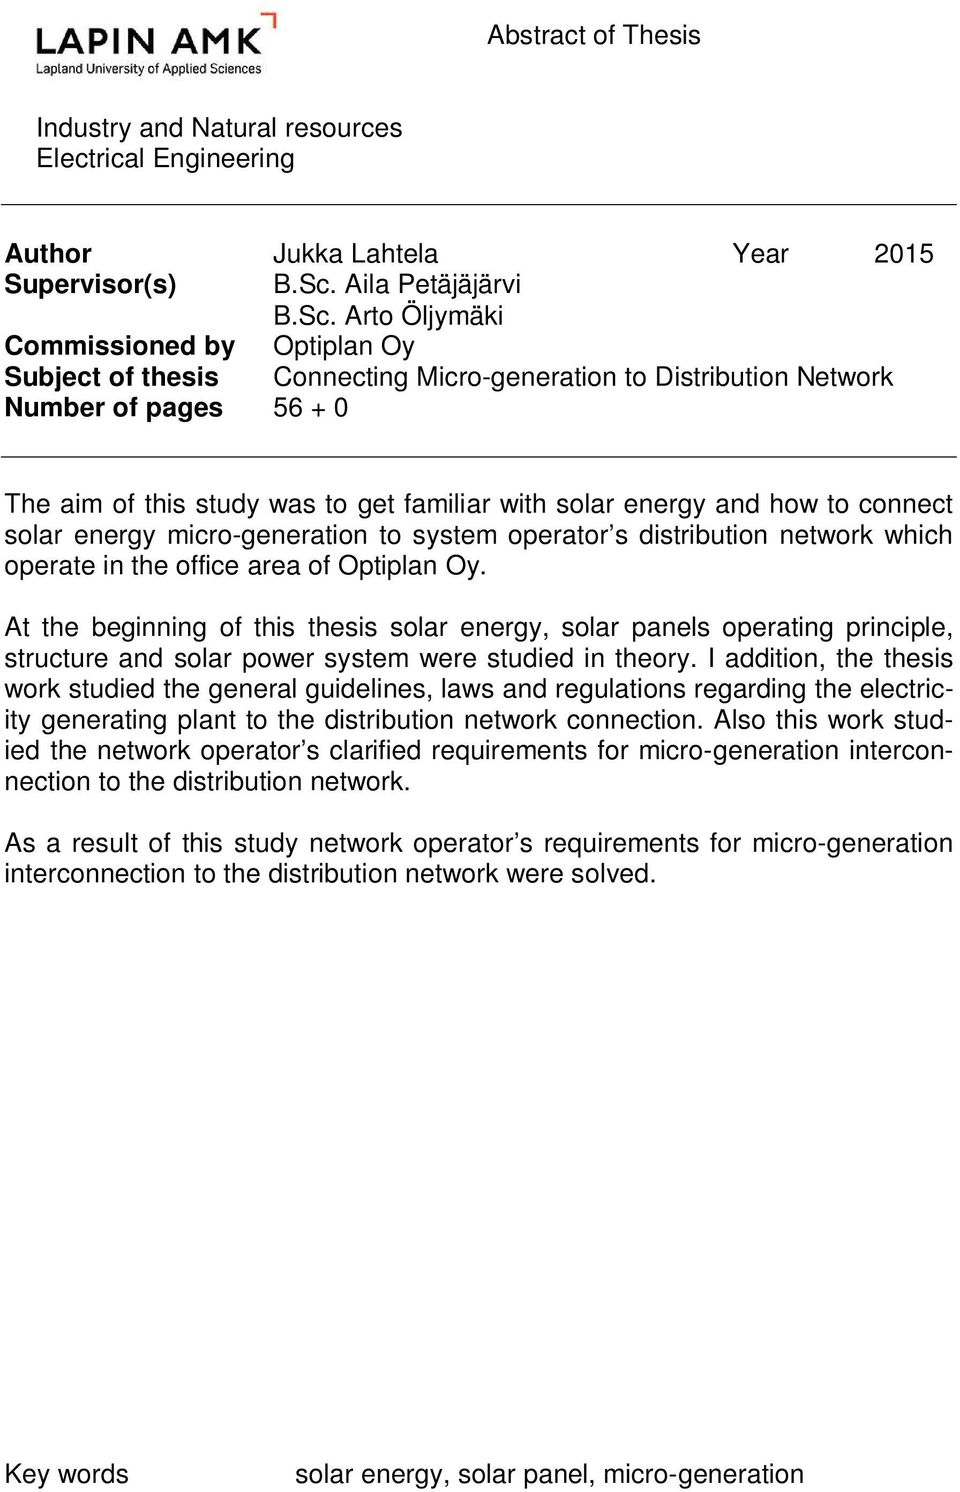 Arto Öljymäki Commissioned by Optiplan Oy Subject of thesis Connecting Micro-generation to Distribution Network Number of pages 56 + 0 The aim of this study was to get familiar with solar energy and